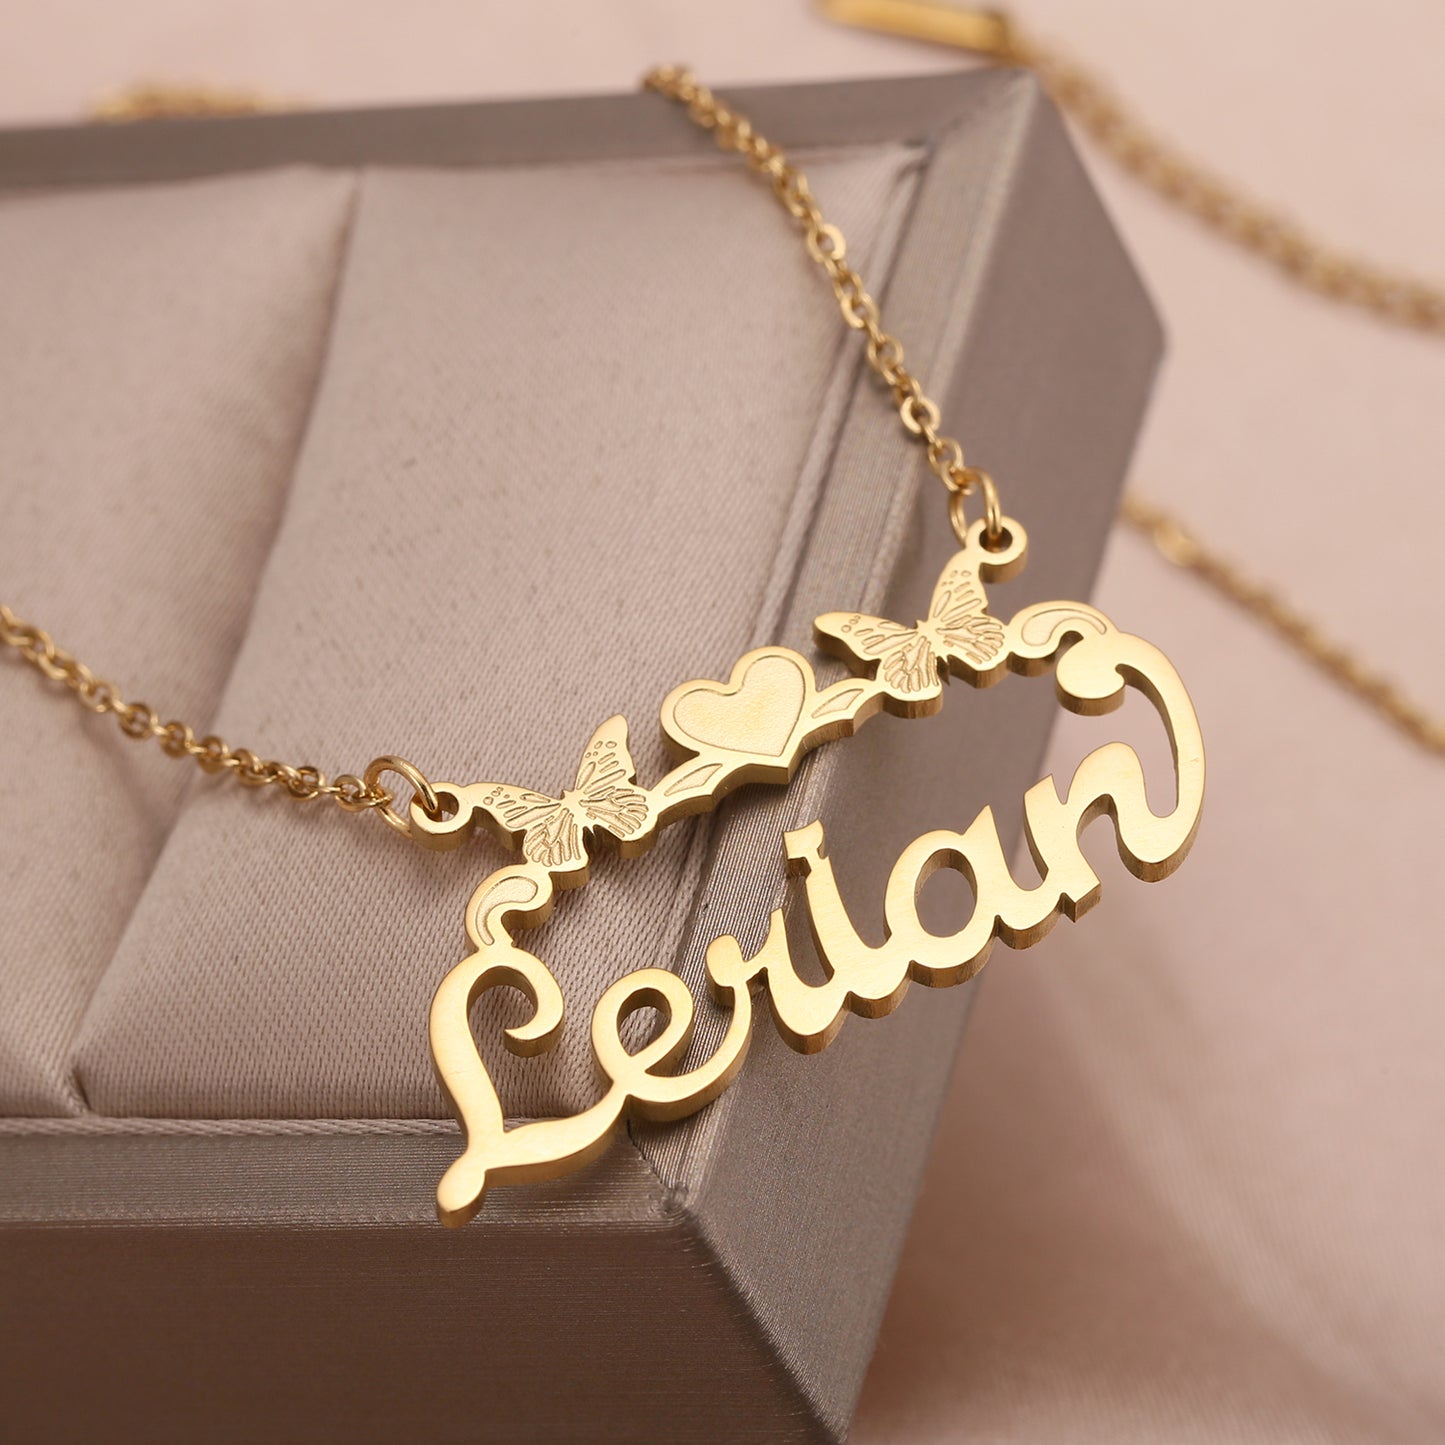 Personalised Single Name Necklace - Ribbon, Butterflies & Hearts Custom For Her Cute Unique Jewellery Gift in Arabic or English -  Anaya